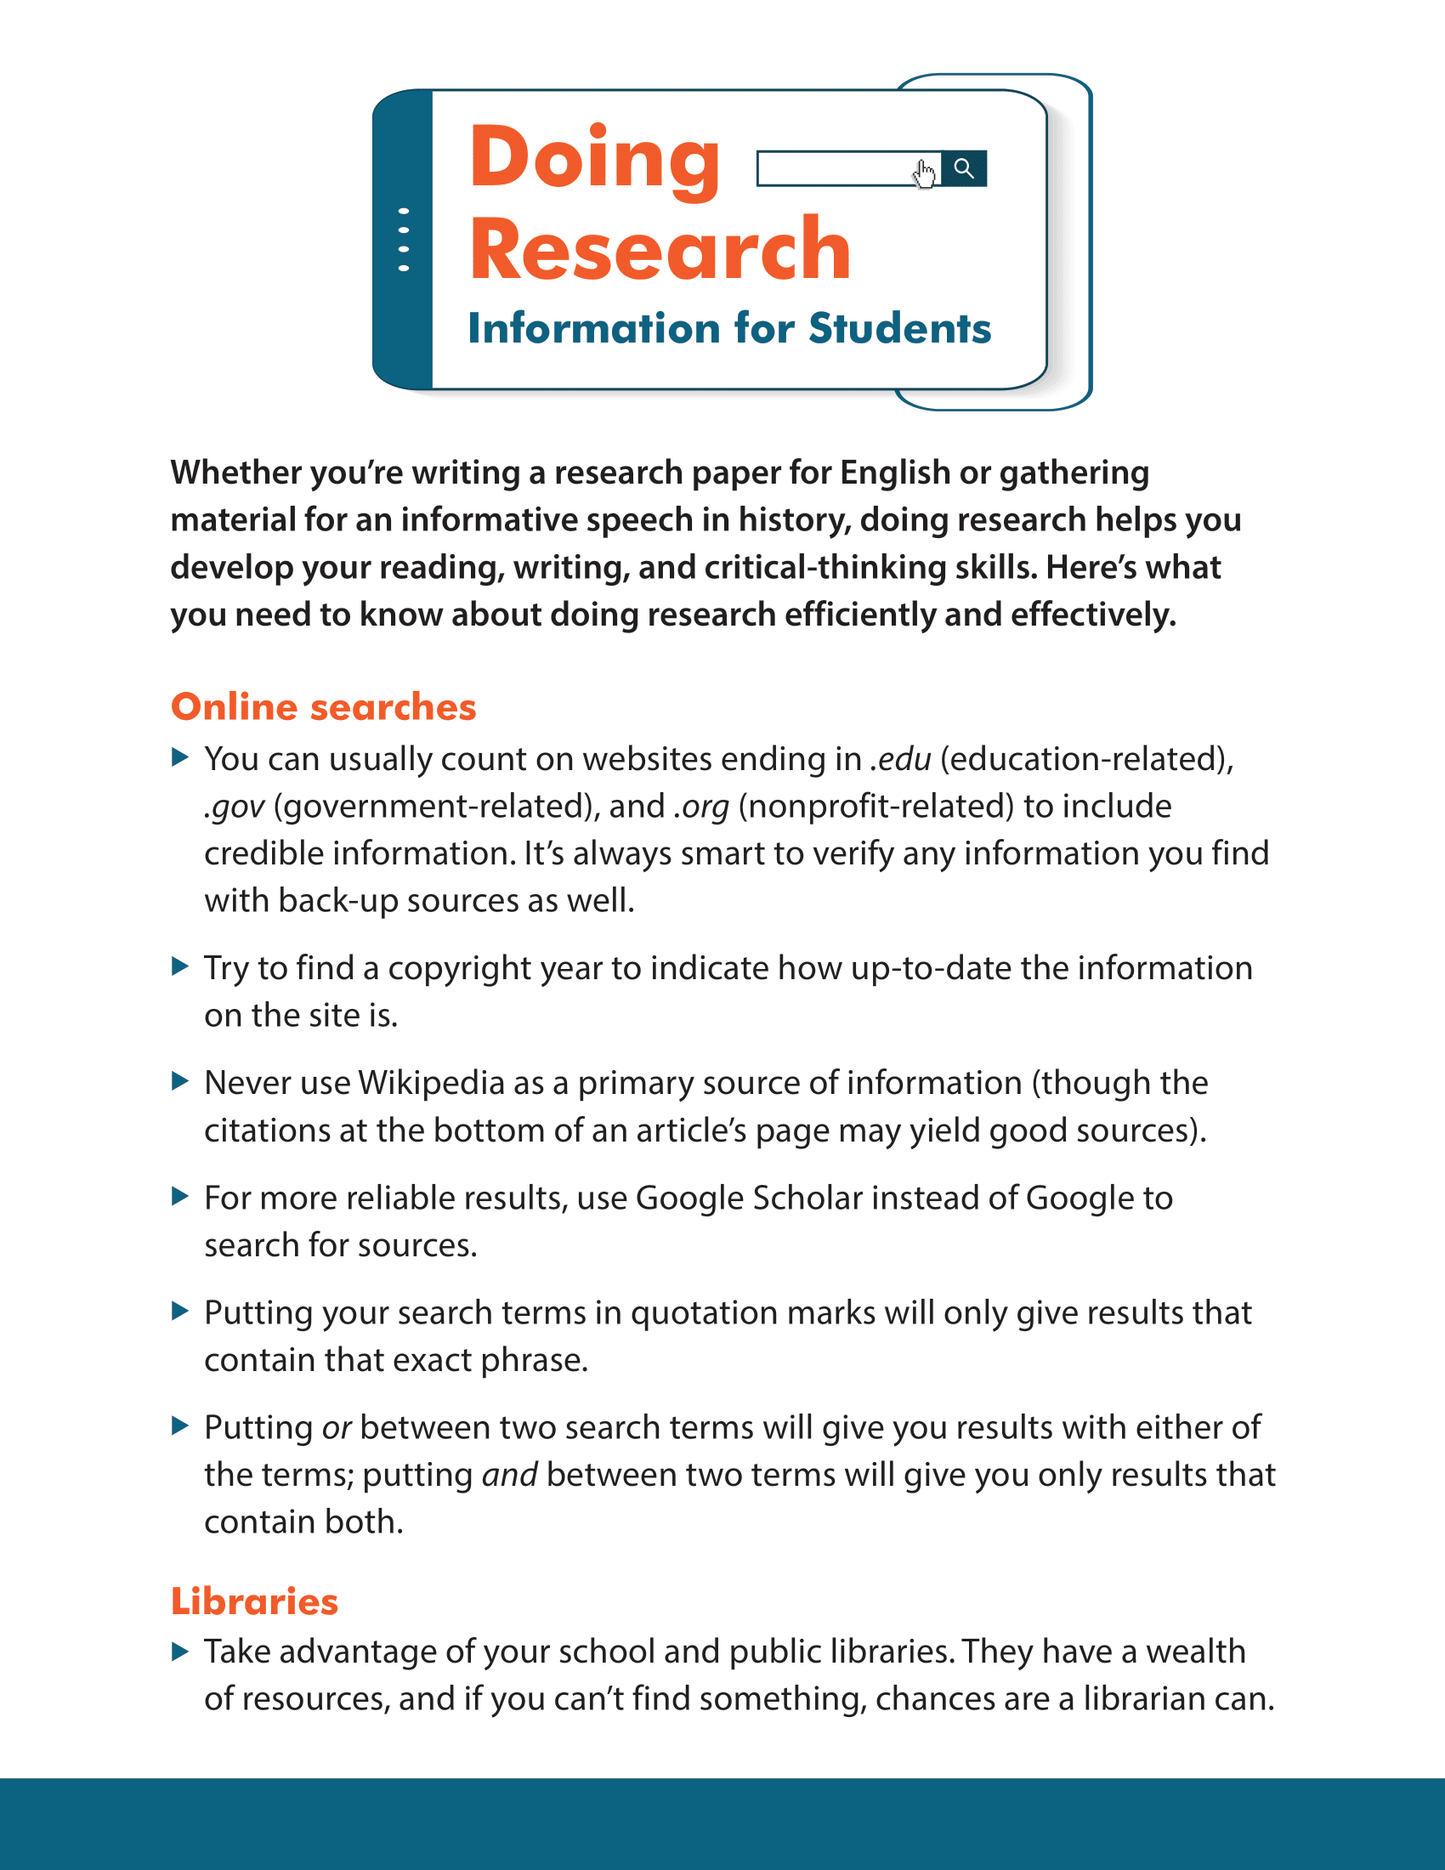 Doing Research - Information for Students